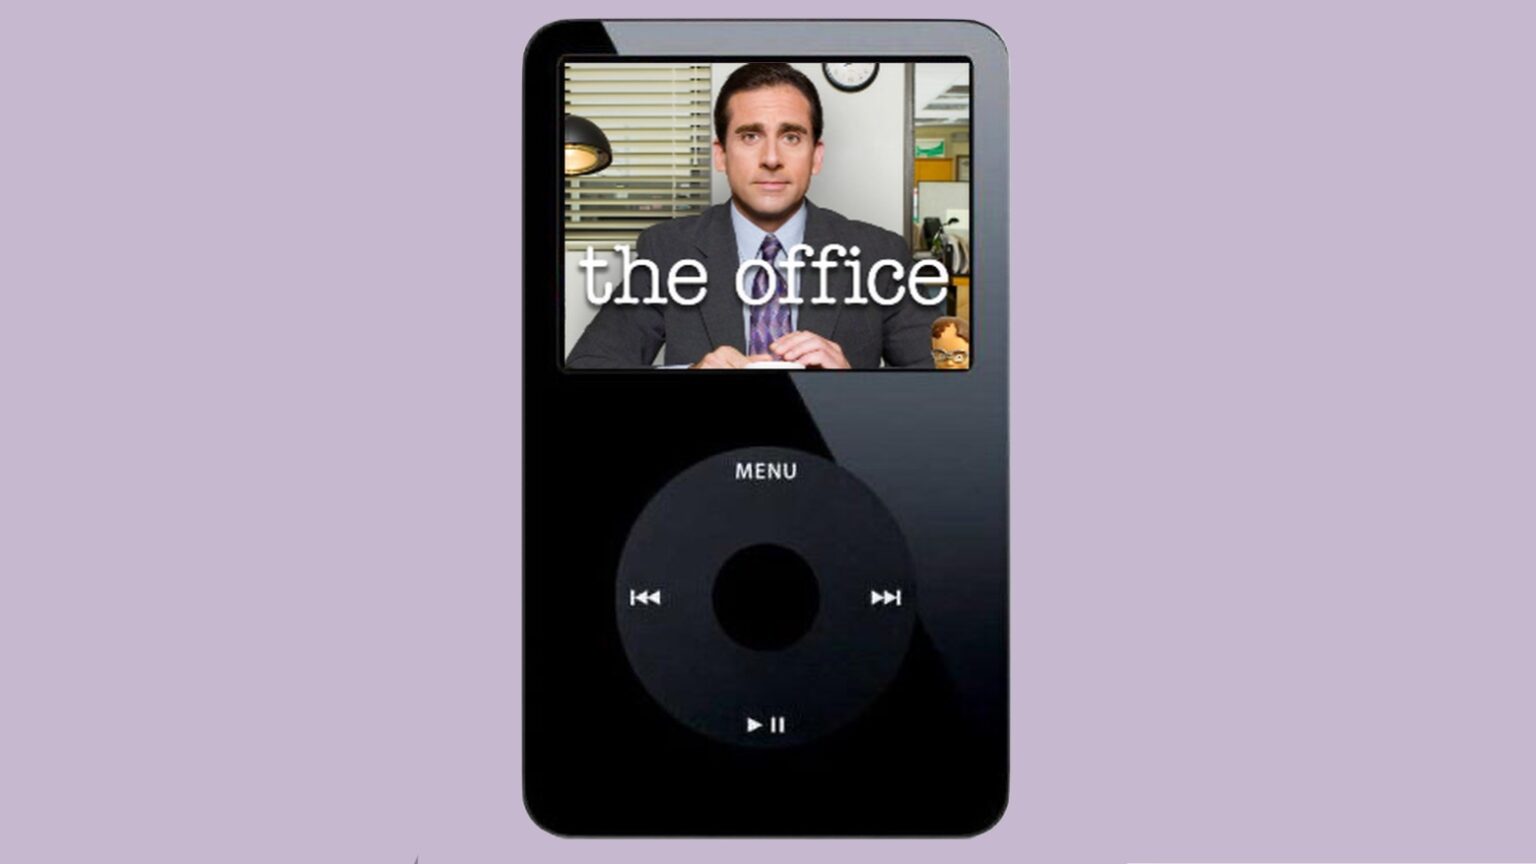 iPod video launched just in time to save ‘The Office’